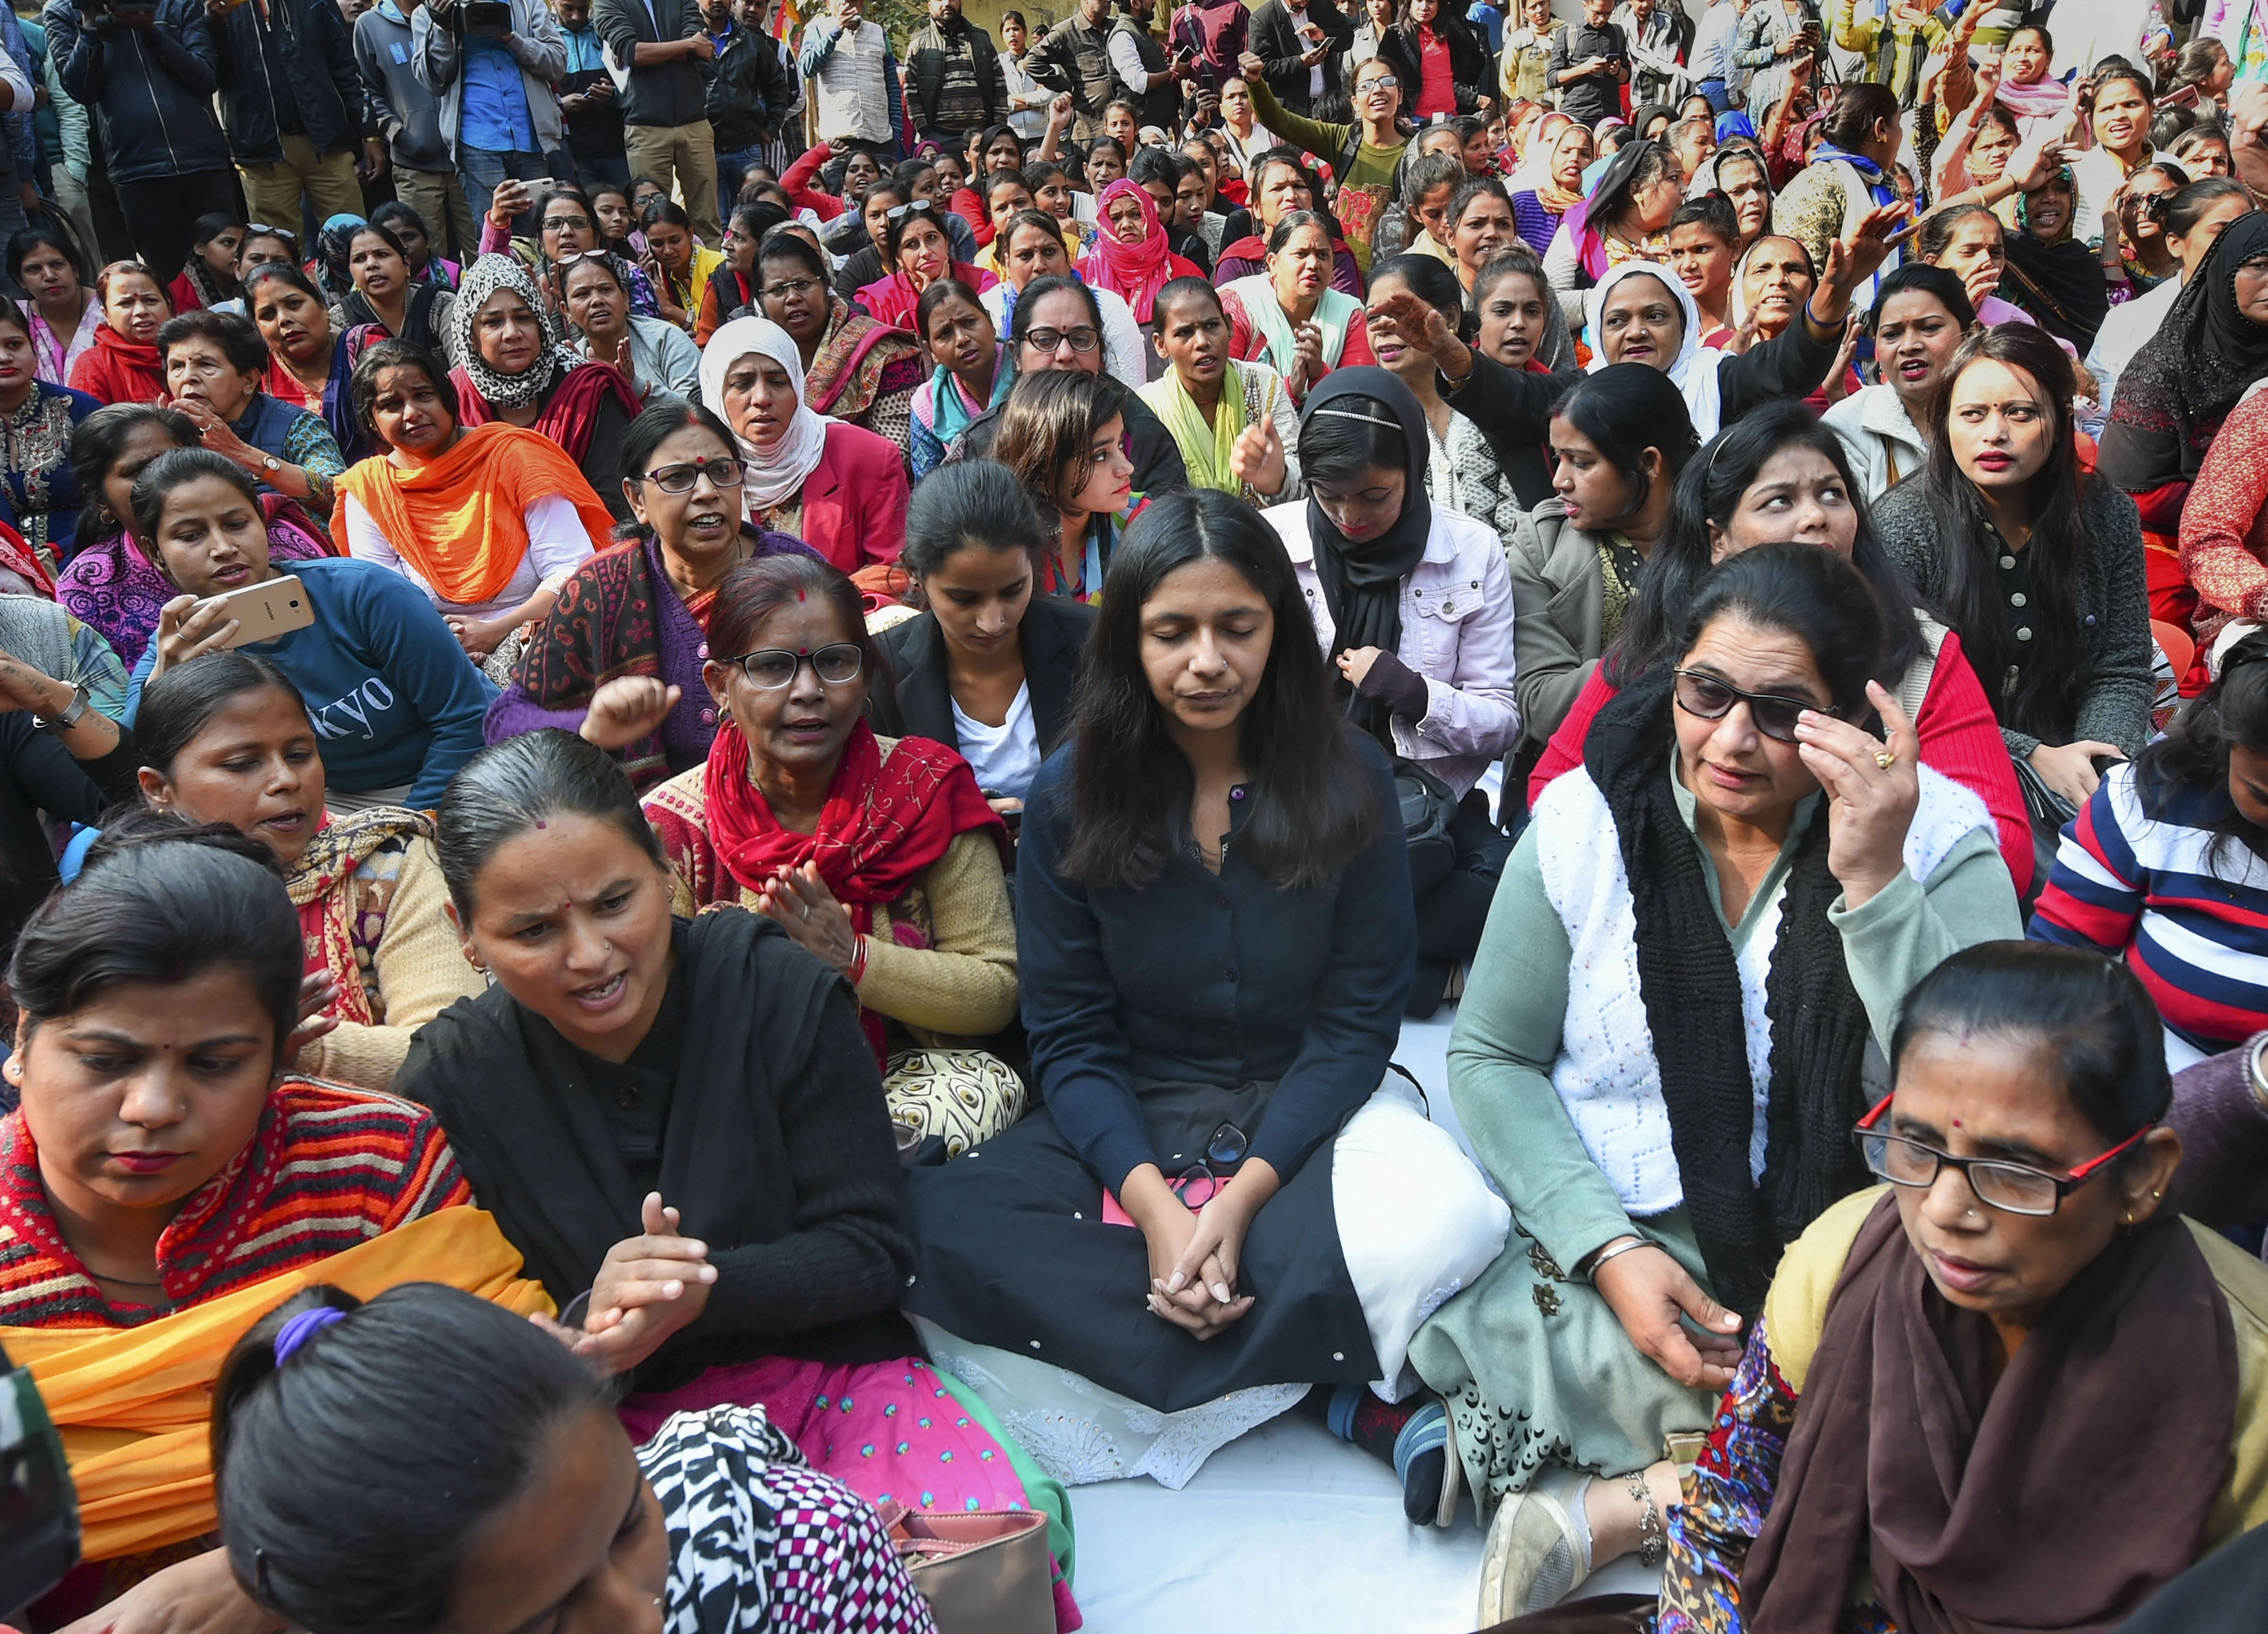 Delhi Commission for Women chief Swati Maliwal sits on indefinite hunger strike against the Hyderabad rape-murder case and growing incidents of crime against women at Jantar Mantar, in New Delhi, Tuesday, December 3, 2019